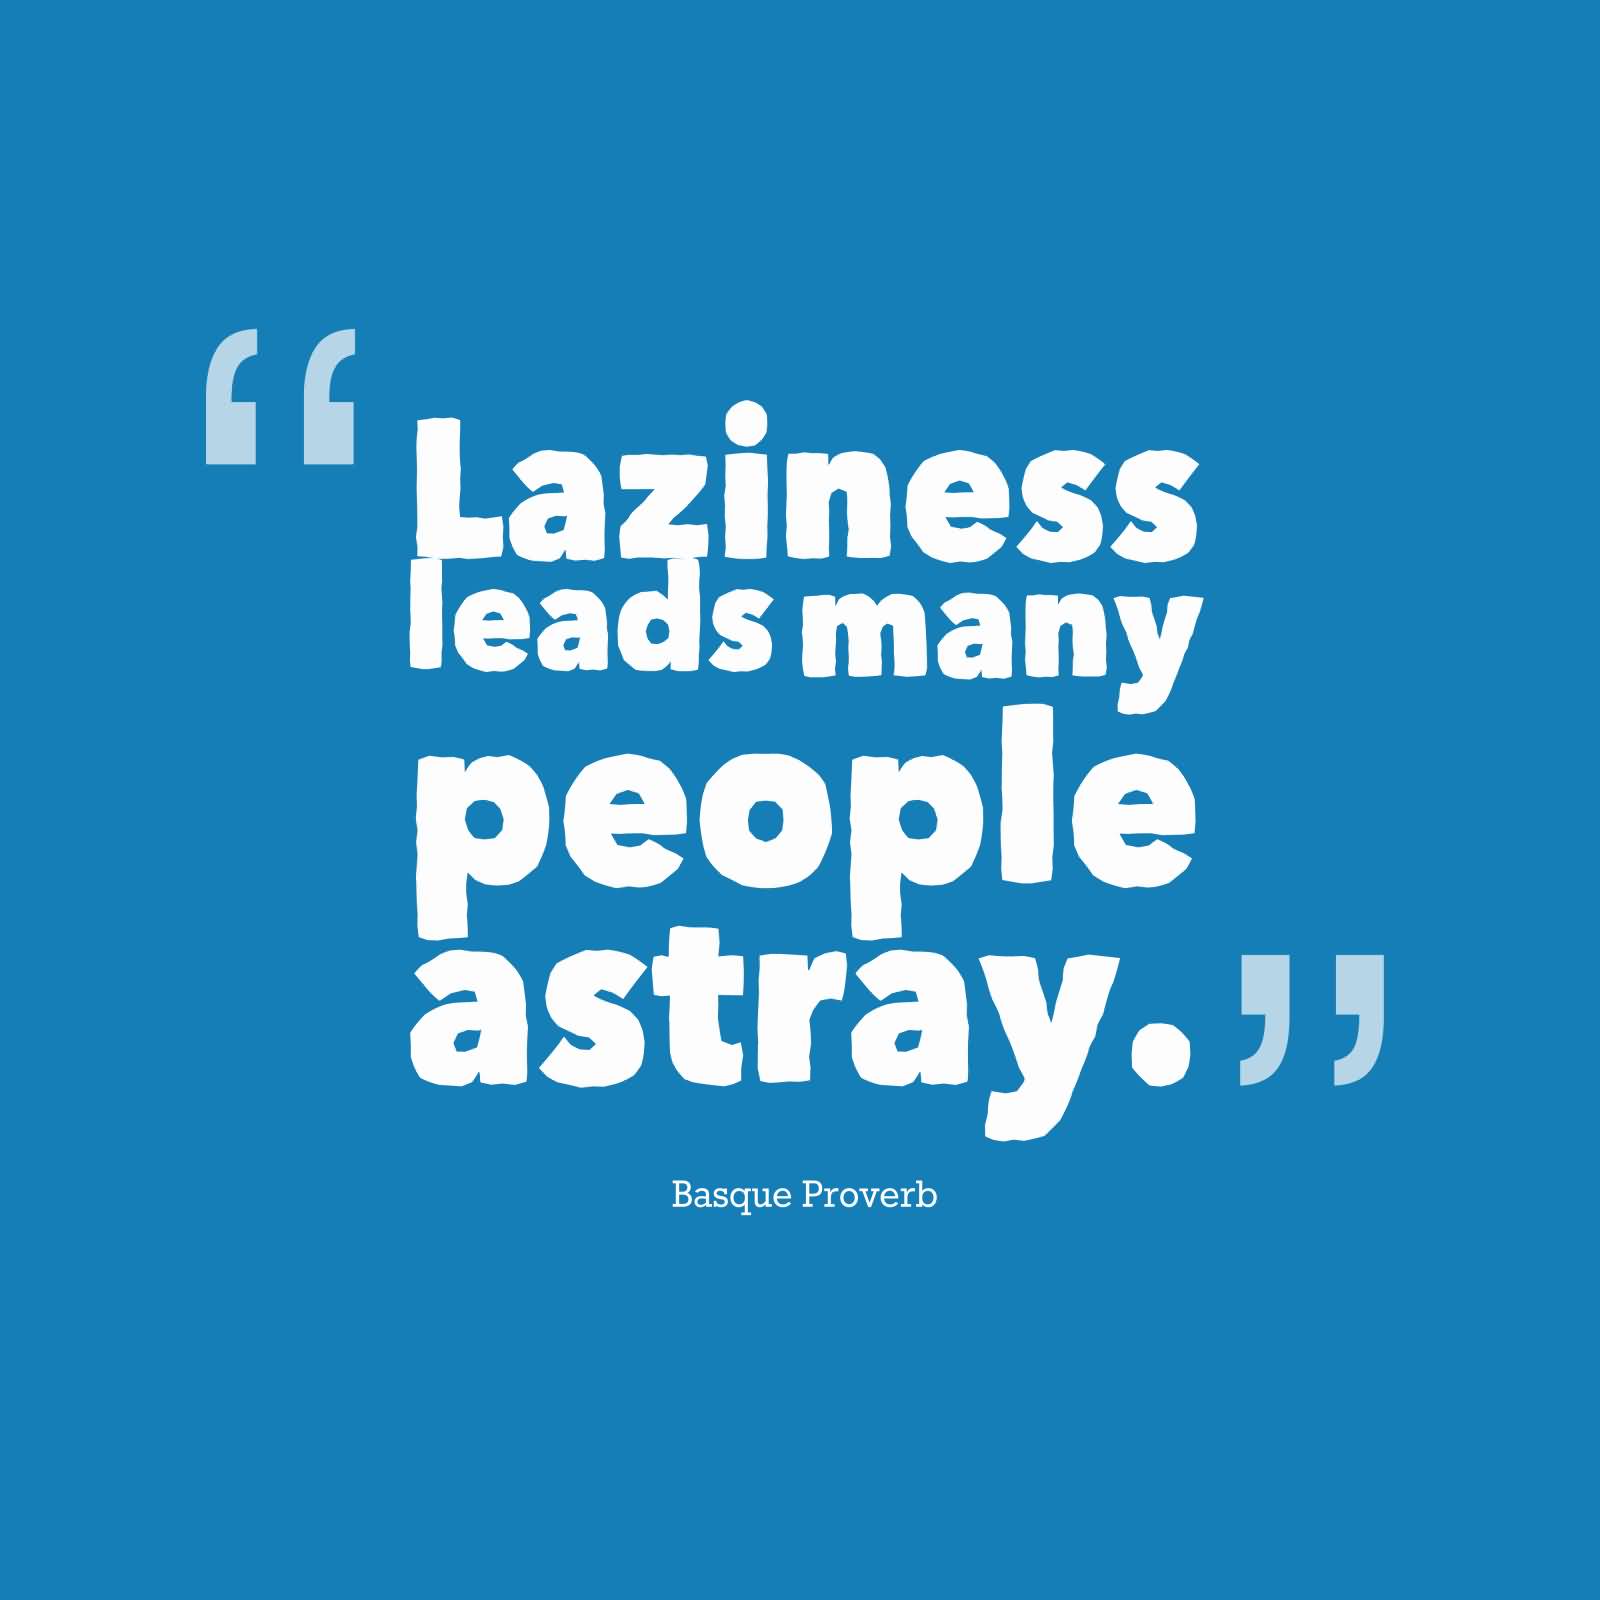 laziness leads many people astray